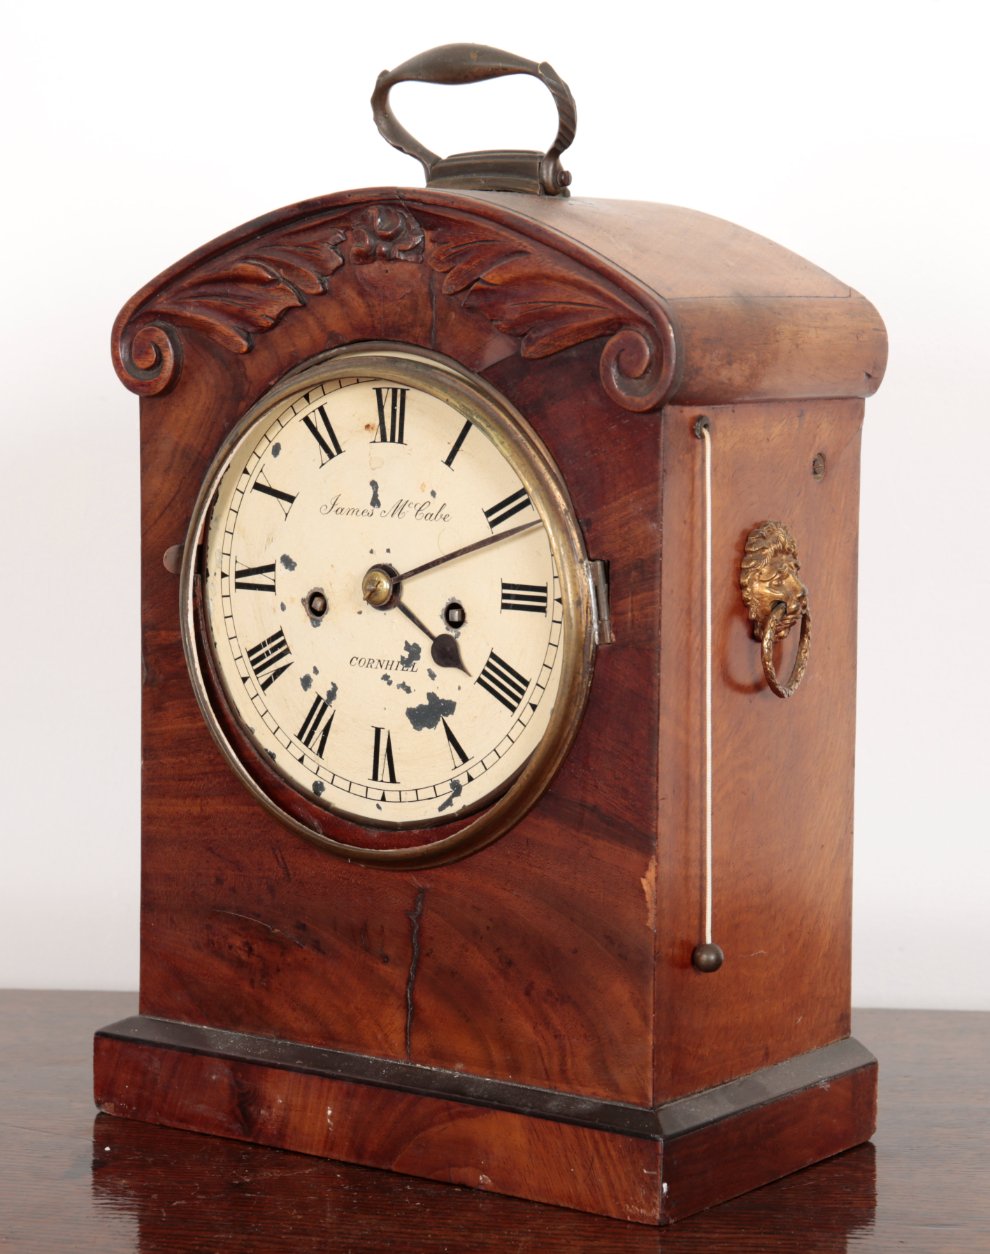 AN EARLY 19TH CENTURY MAHOGANY MANTEL CLOCK INSCRIBED JAMES MCCABE OF LONDON - Image 2 of 2